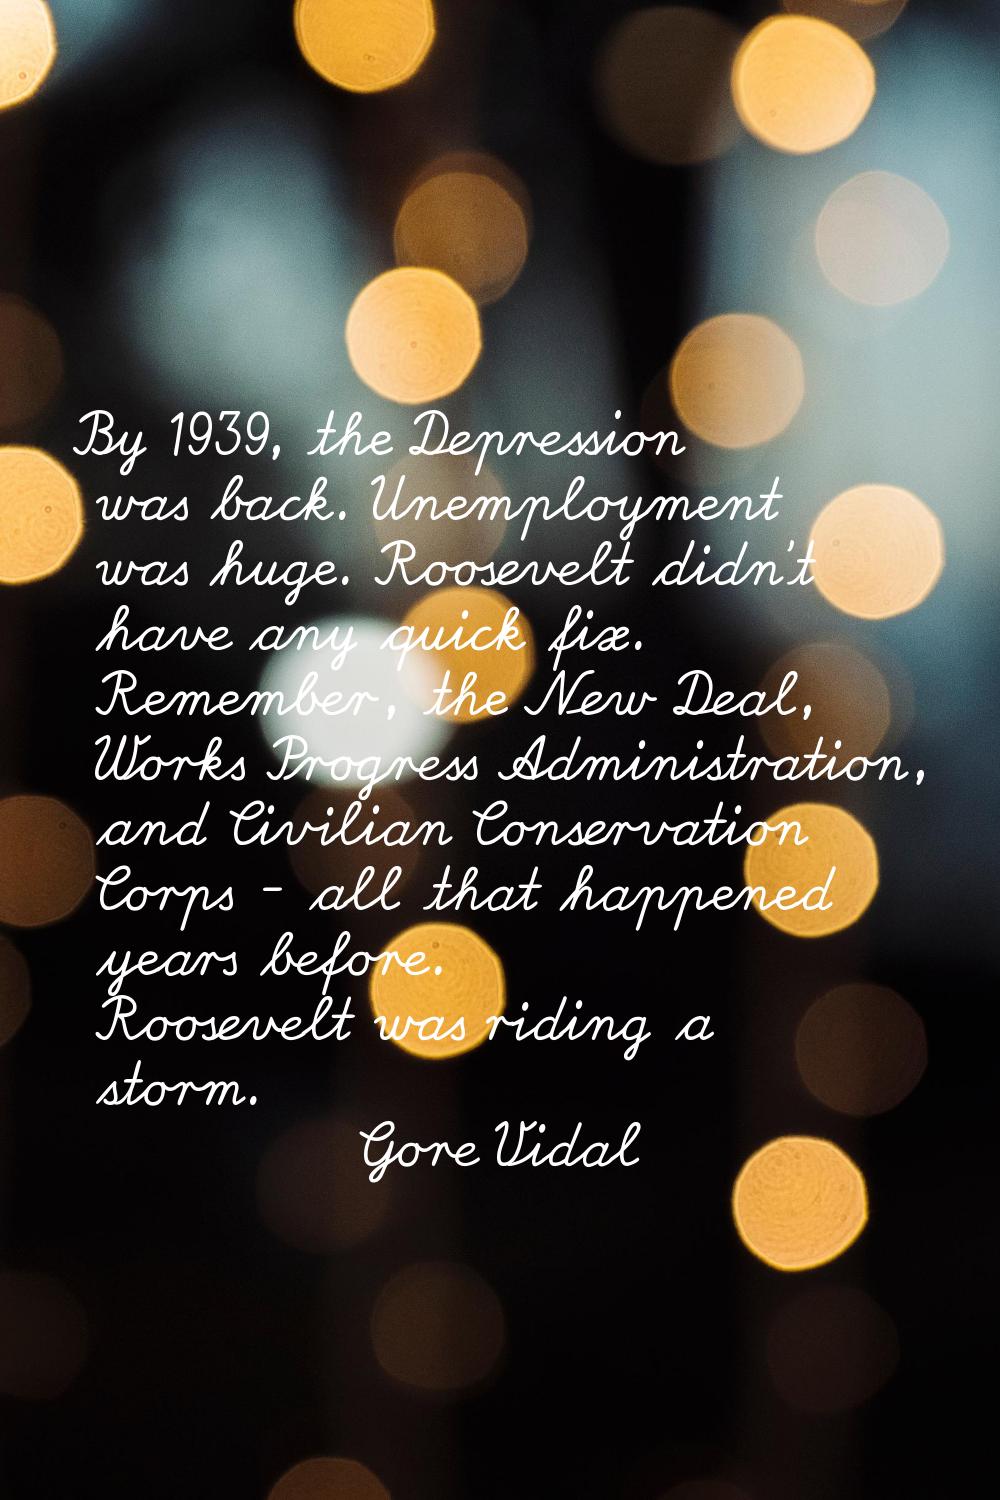 By 1939, the Depression was back. Unemployment was huge. Roosevelt didn't have any quick fix. Remem